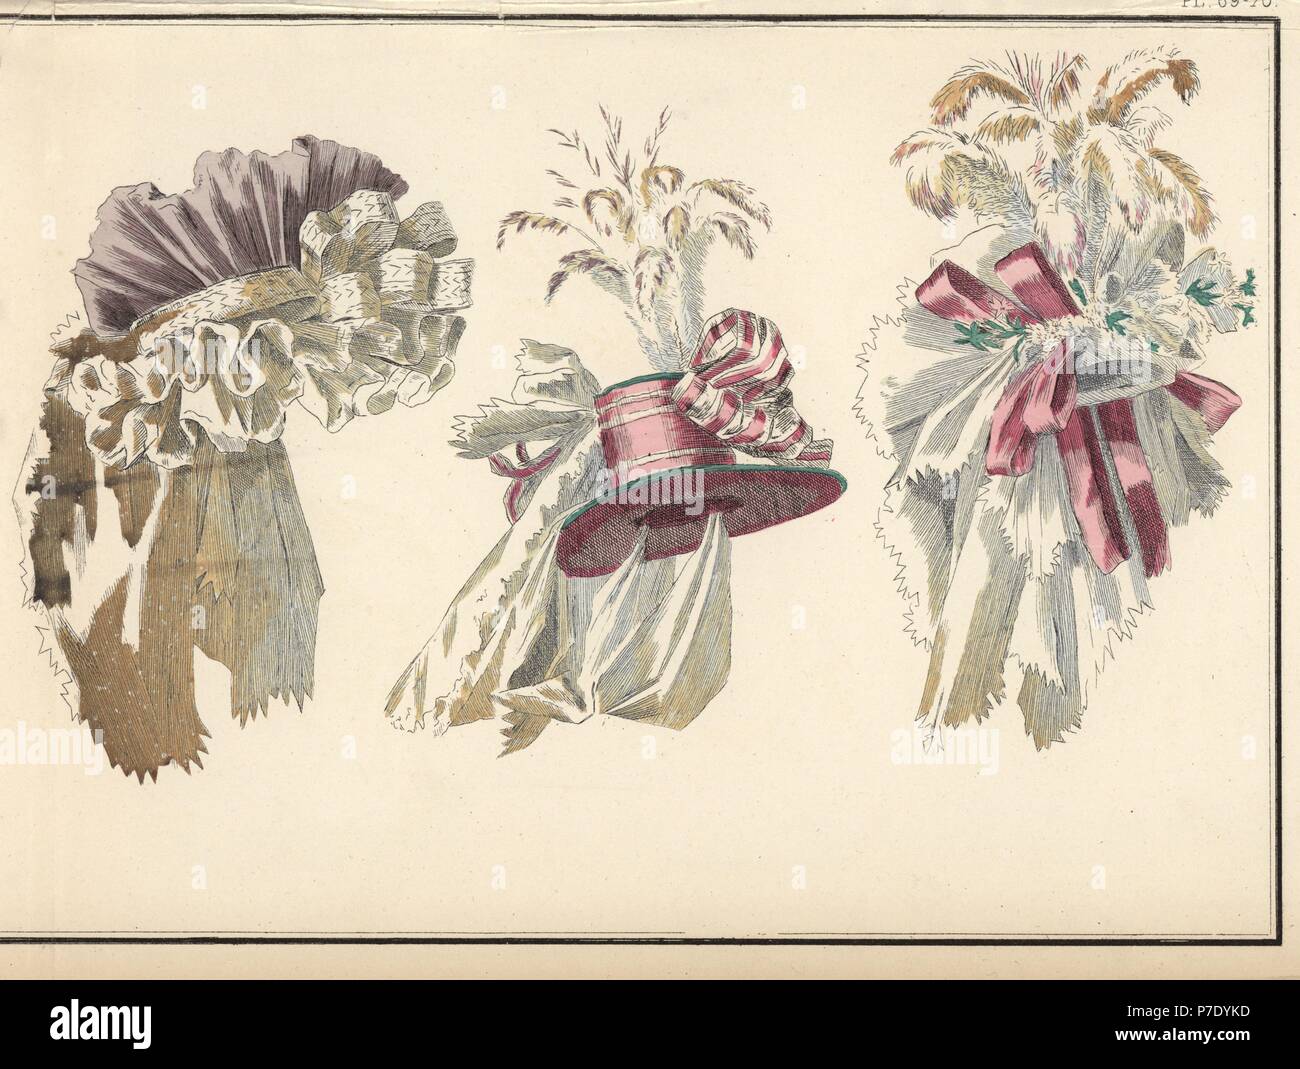 Fashionable hats of 1788. Demi-bonnet in violet gauze with white frills,  hat in pink taffeta with ribbons, gauze and feathers, and a pouf in Italian  gauze with ribbons and plumes. Handcoloured lithograph